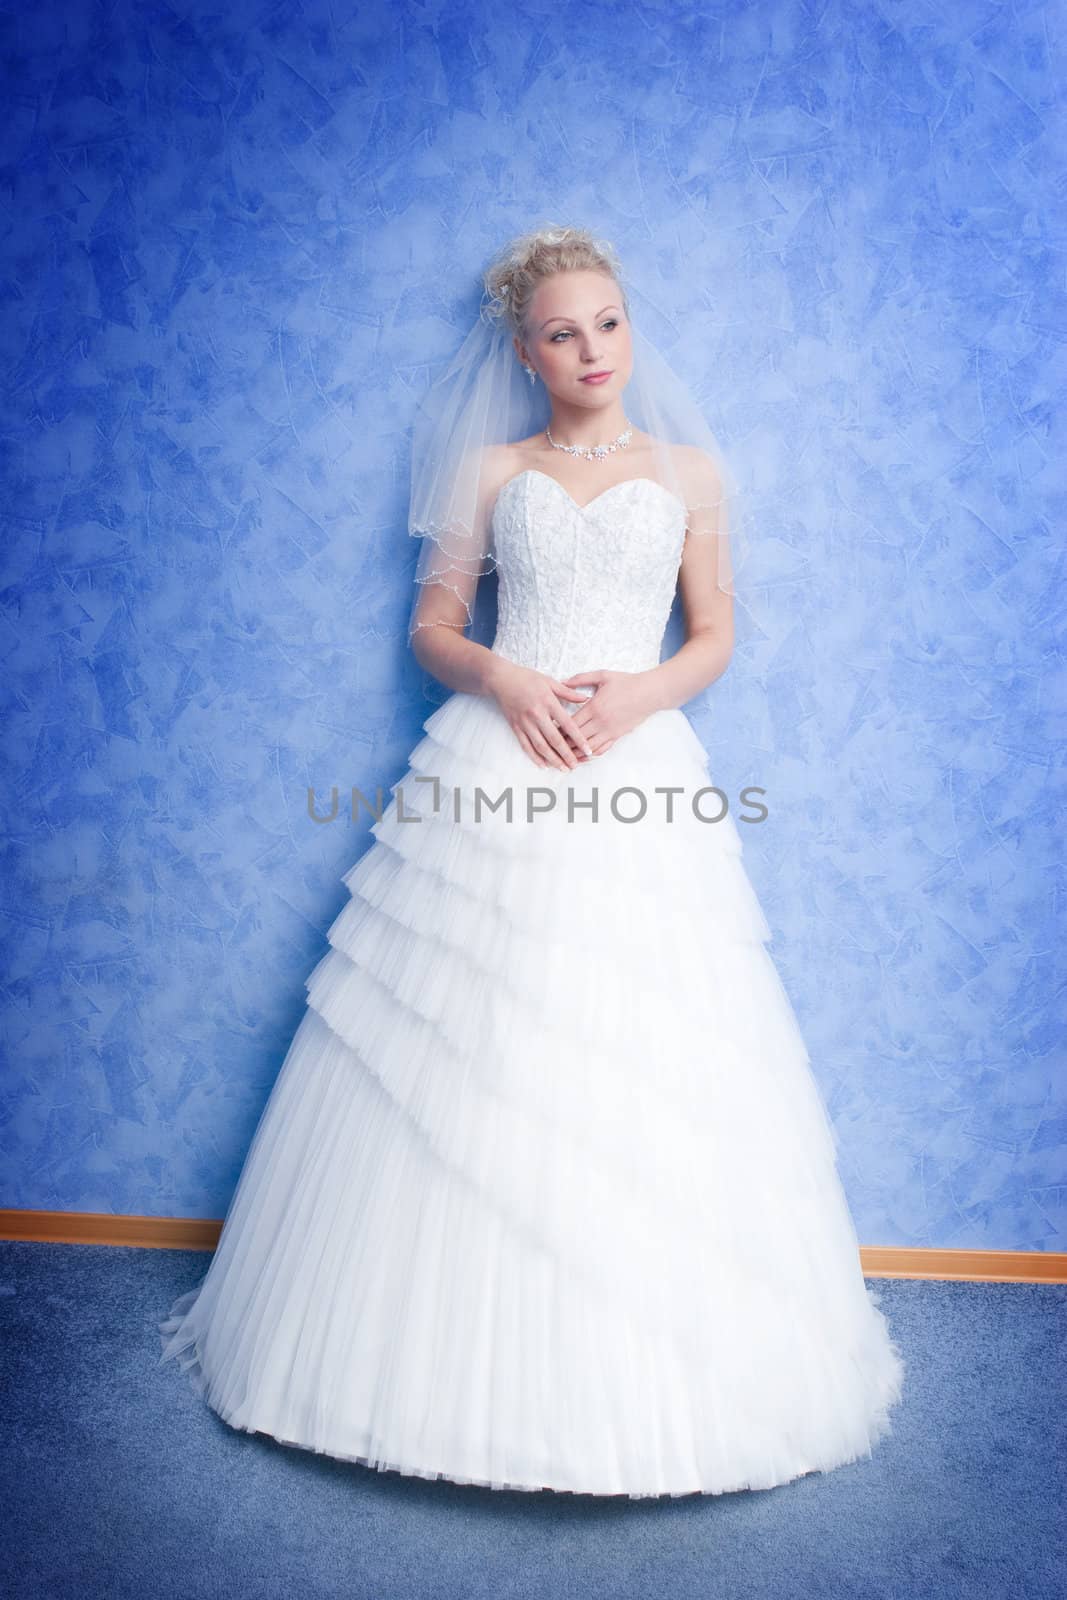 pensive bride on the blue background